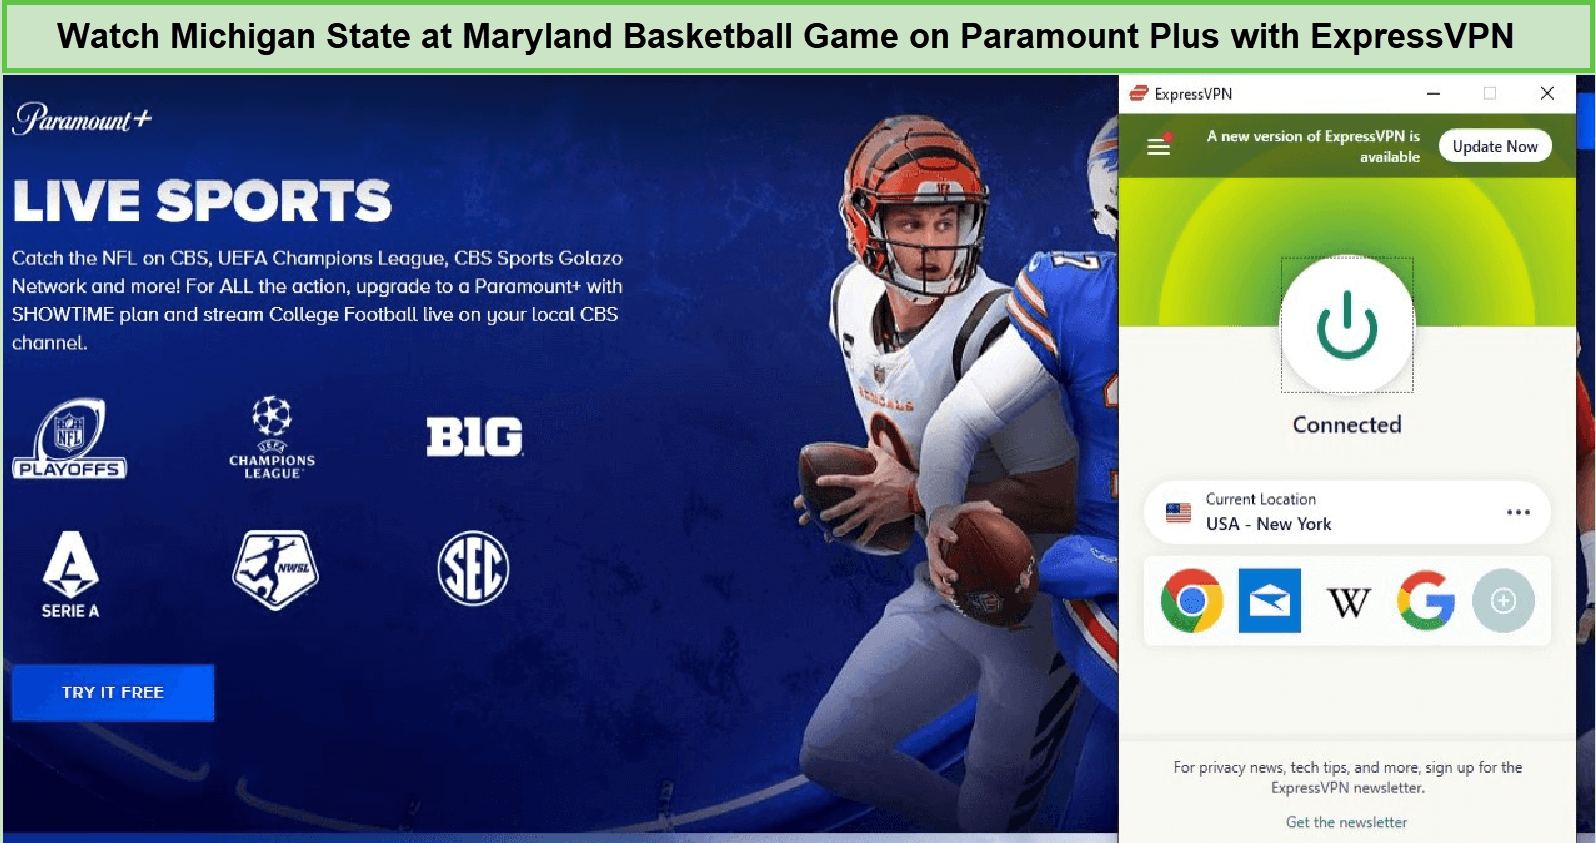 Watch-Michigan-State-at-Maryland-Basketball-Game-in-Canada-on-Paramount-Plus-with-ExpressVPN